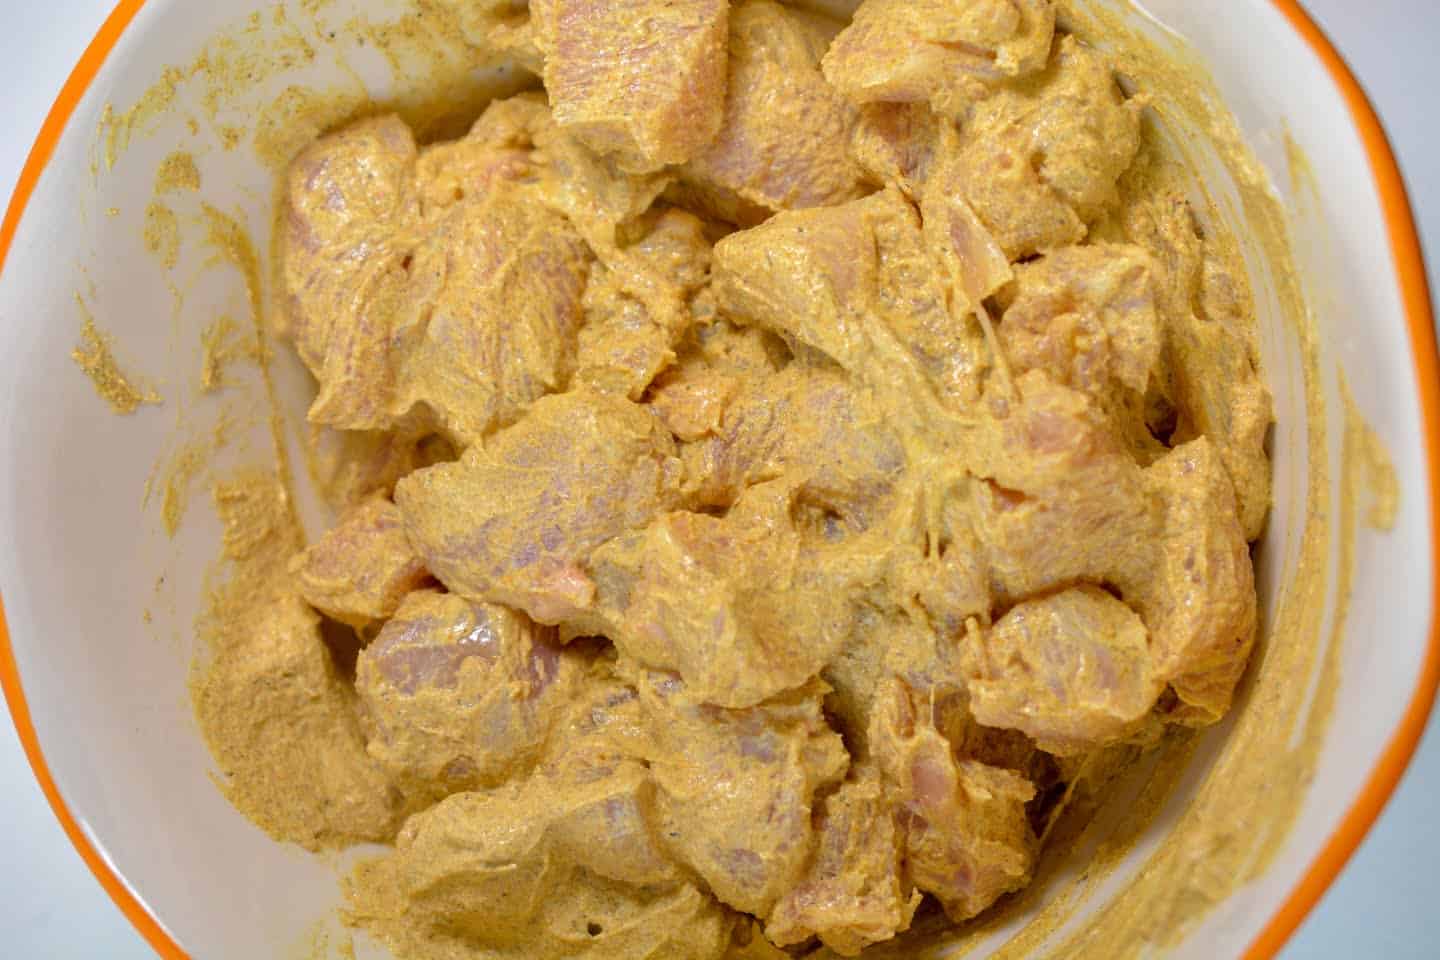 Indian butter chicken marinade with cubed chicken thighs or chicken breasts